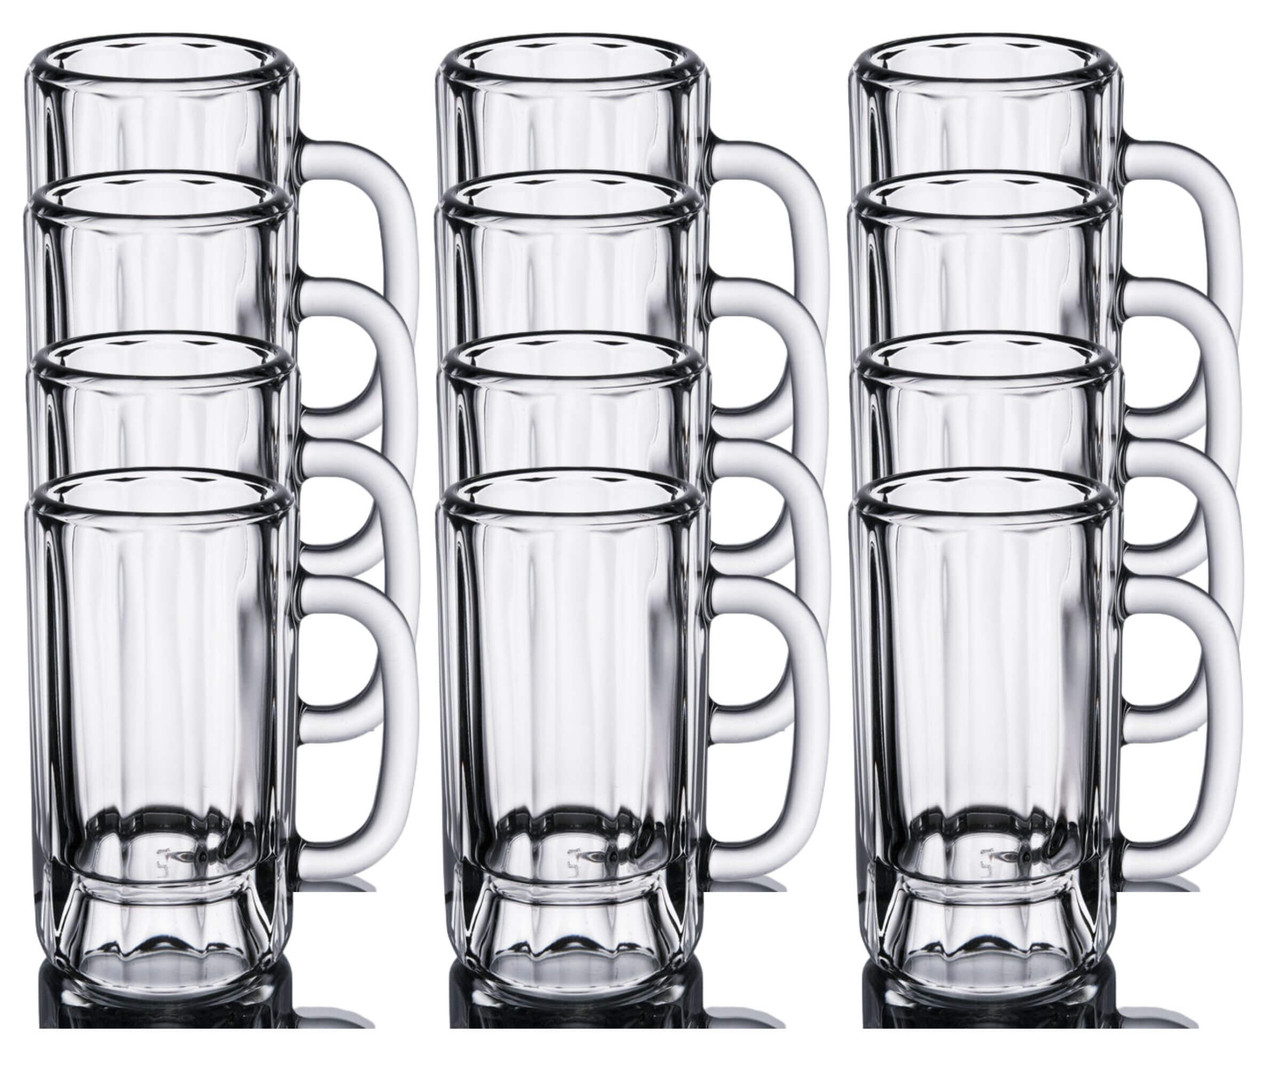 Libbey Set of 12 Paneled Beer Mugs - 14 oz. | Classic Design-Chicken Pieces